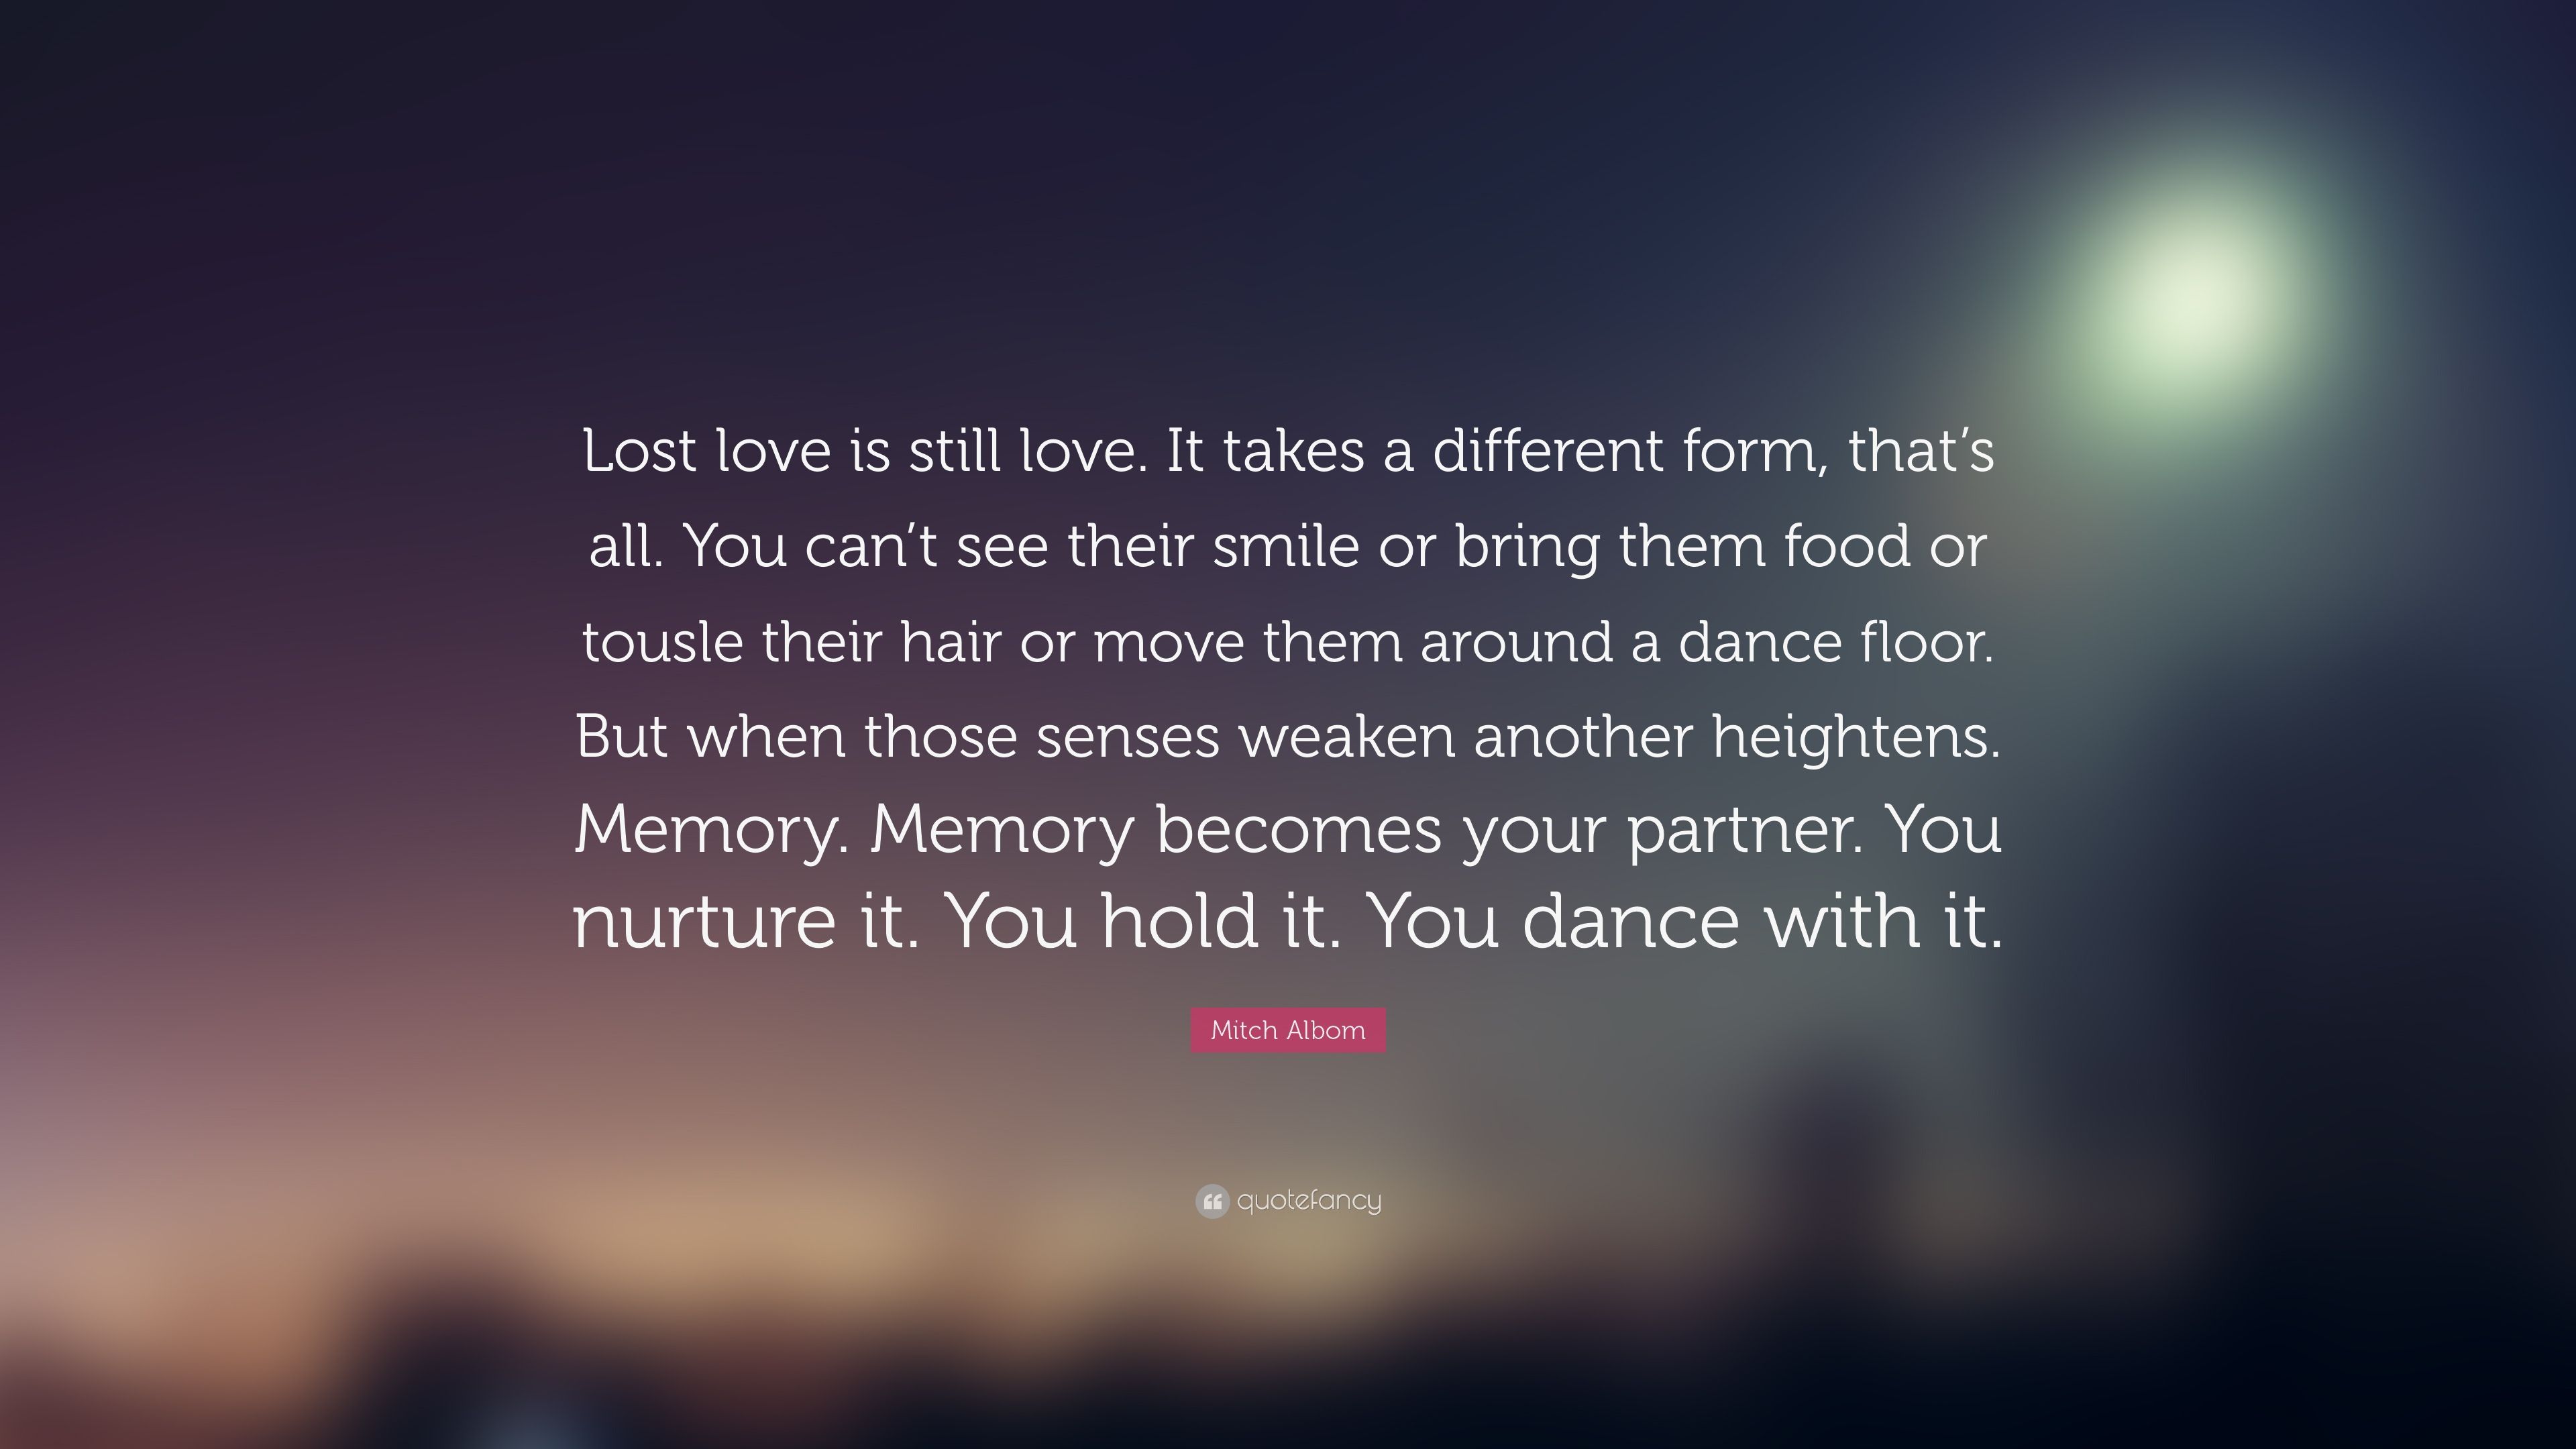 Mitch Albom Quote: “Lost love is still love. It takes a different form, that's all. You can't see their smile or bring them food or tousle t.” (22 wallpaper)